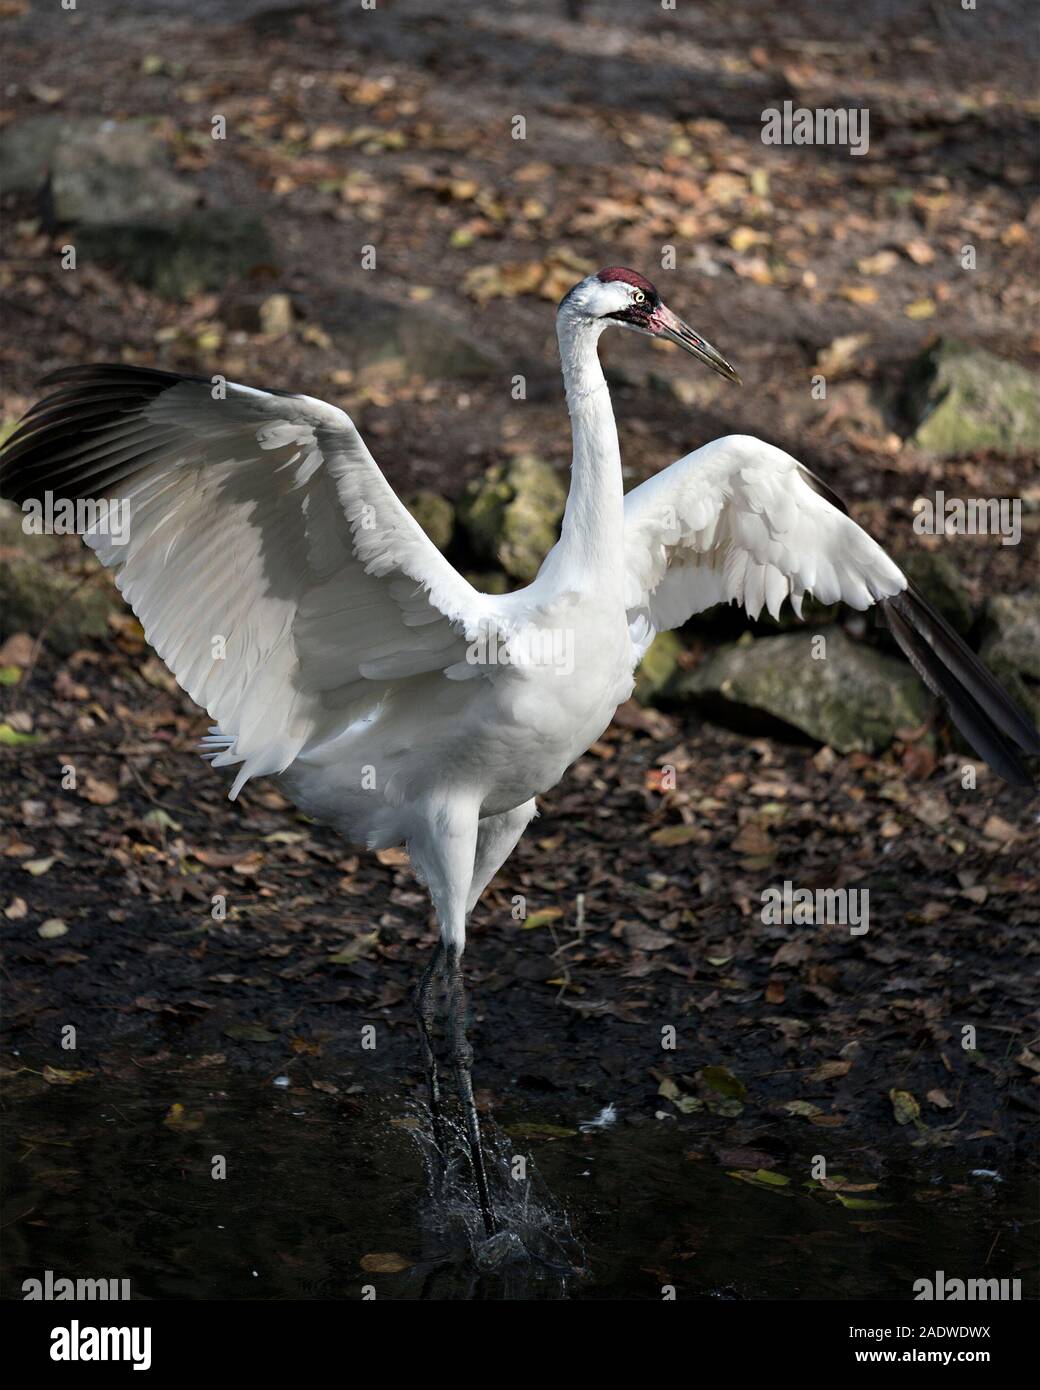 Whopping Crane bird close-up profile view with spread wings with background exposing its red crown on its head, eye, beak in its surrounding . Stock Photo